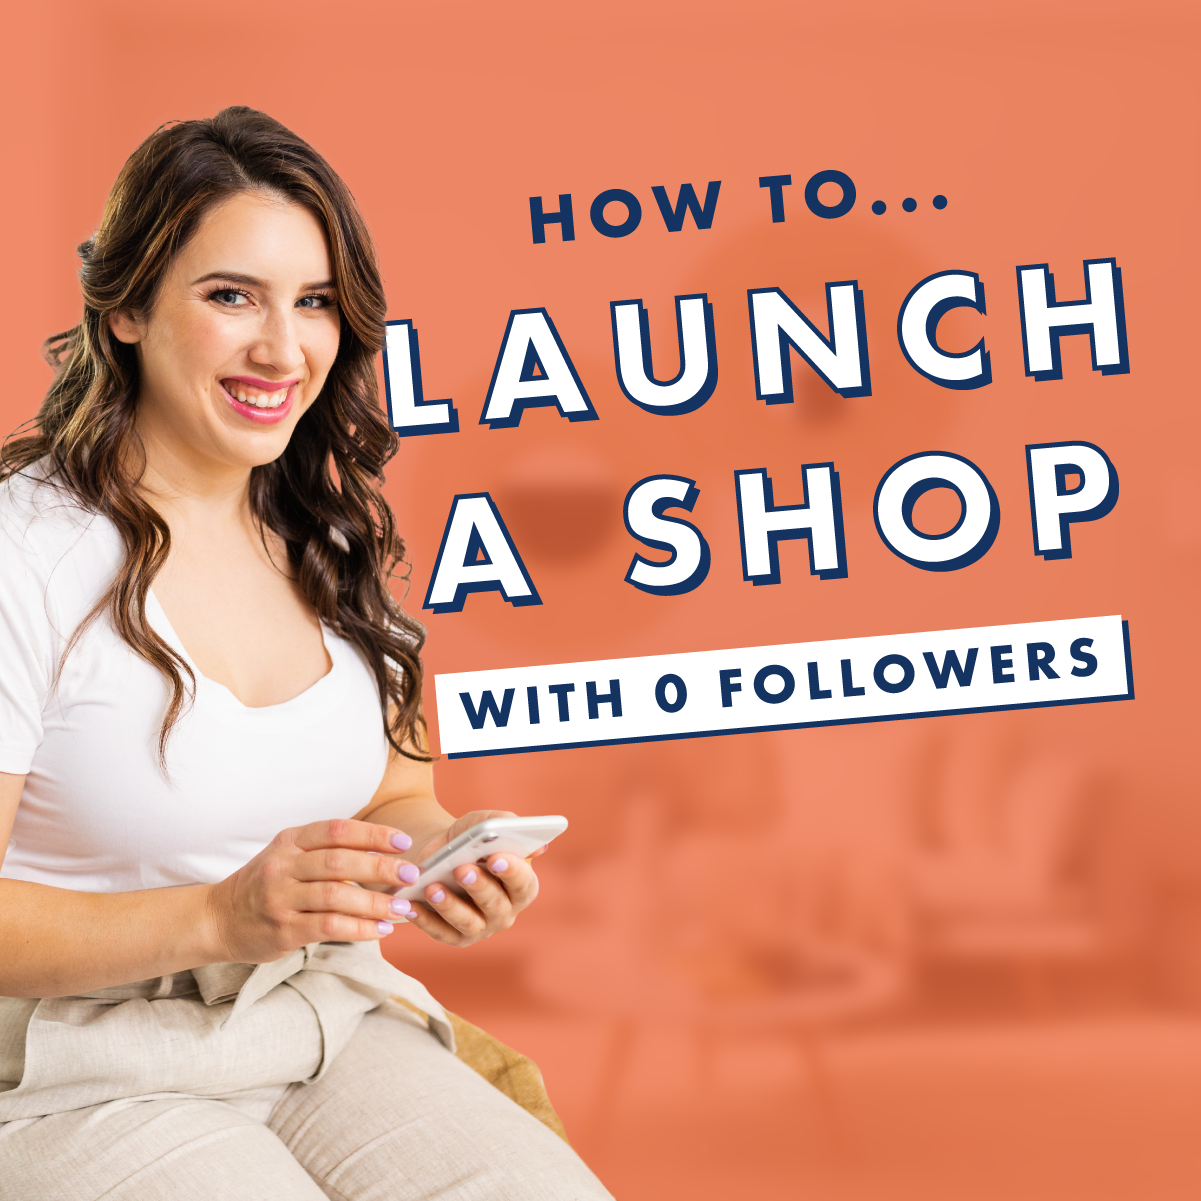 christina scalera how to launch a shop with 0 followers